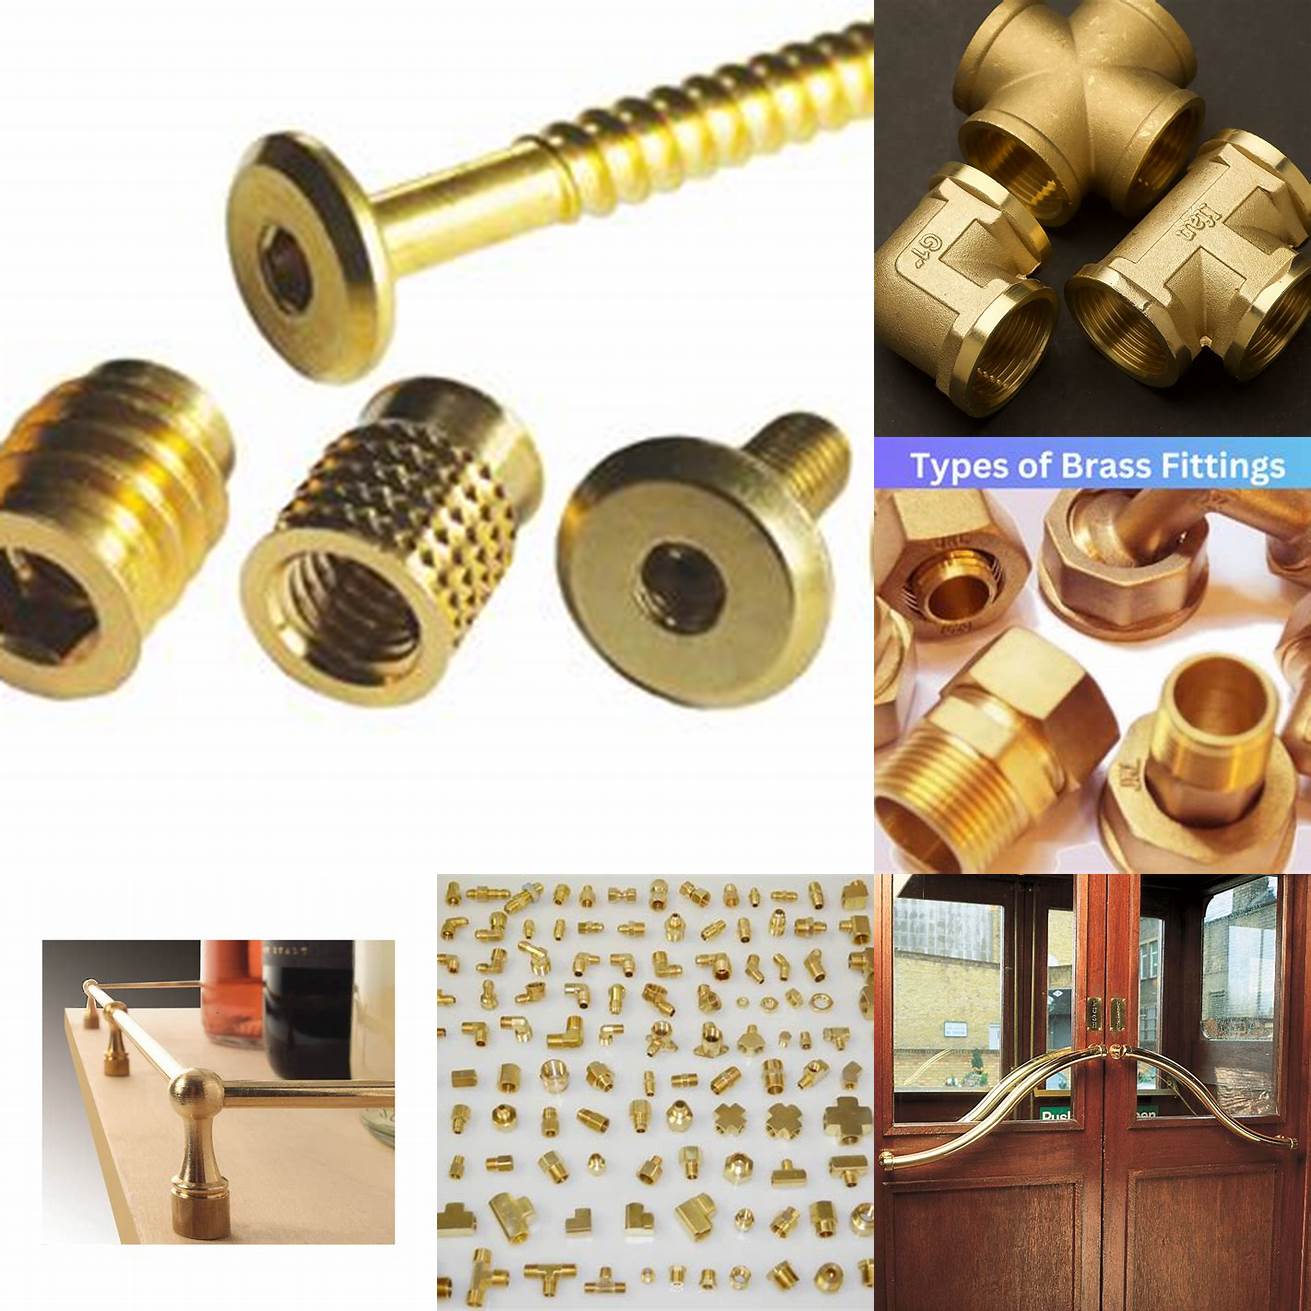 7 Different styles of brass fittings